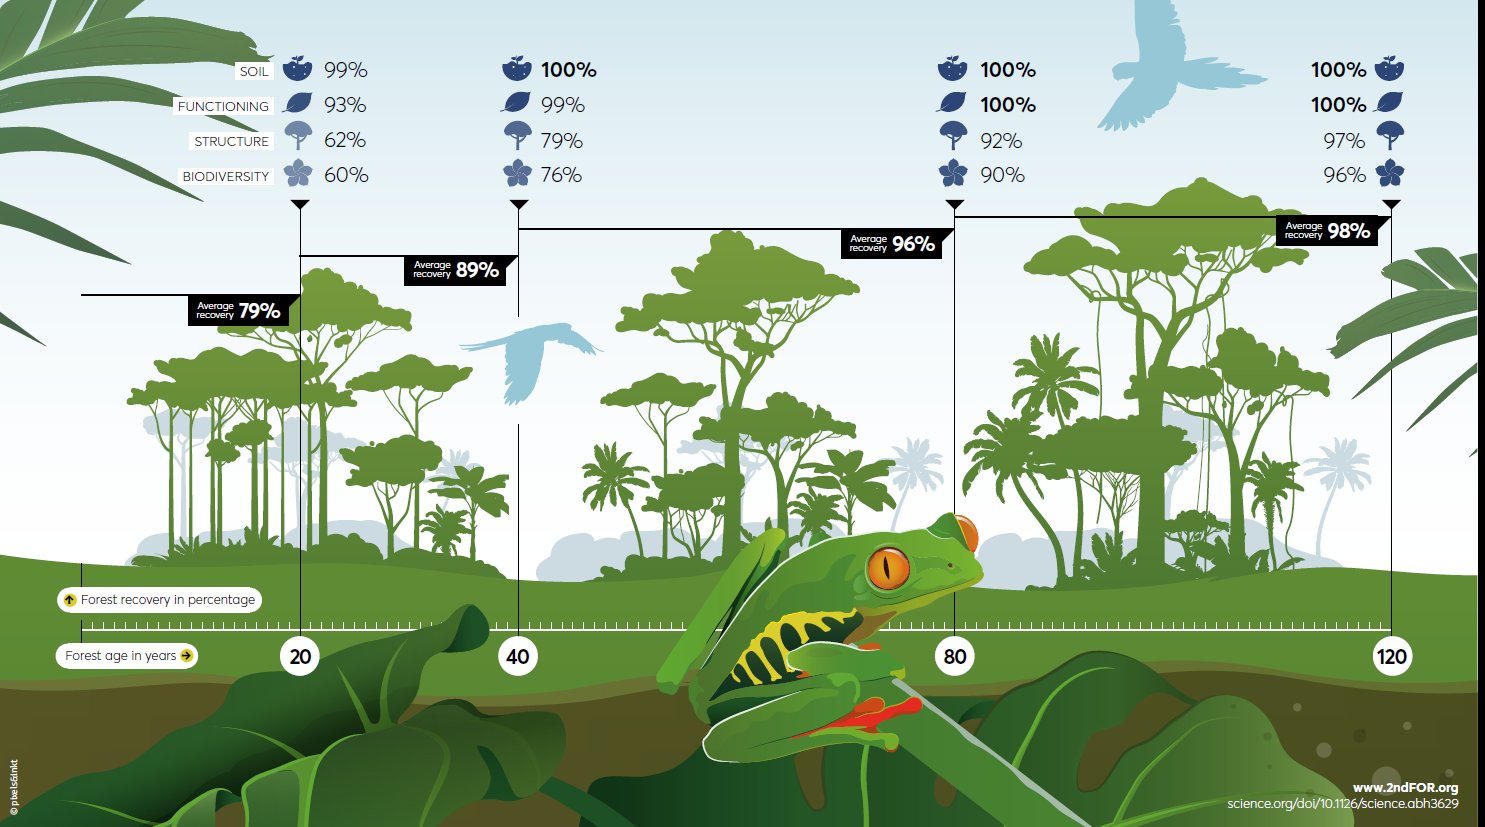 Infographic, showing the recovery of tropical forests over time. The forests regrow naturally on abandoned agricultural lands. Four groups of forest characteristics are shown, related to soil (symbolized by the soil pictogram), ecosystem functioning (symbolized by the leaf), forest structure (symbolized by the tree) and tree biodiversity (symbolized by the flower). Average percentage of recovery (compared to old-growth forests) after 20, 40, 80, and 120 years is shown for each forest attribute (as a percentage after each pictogram) and for the 4 groups of attributes combined (as the horizontal lines). The study was based on 77 landscapes and >2200 forest plots distributed over tropical Middle and South America  and West Africa. Credit: Pixels&ink. For more information see https://tinyurl.com/47srdkwx 
